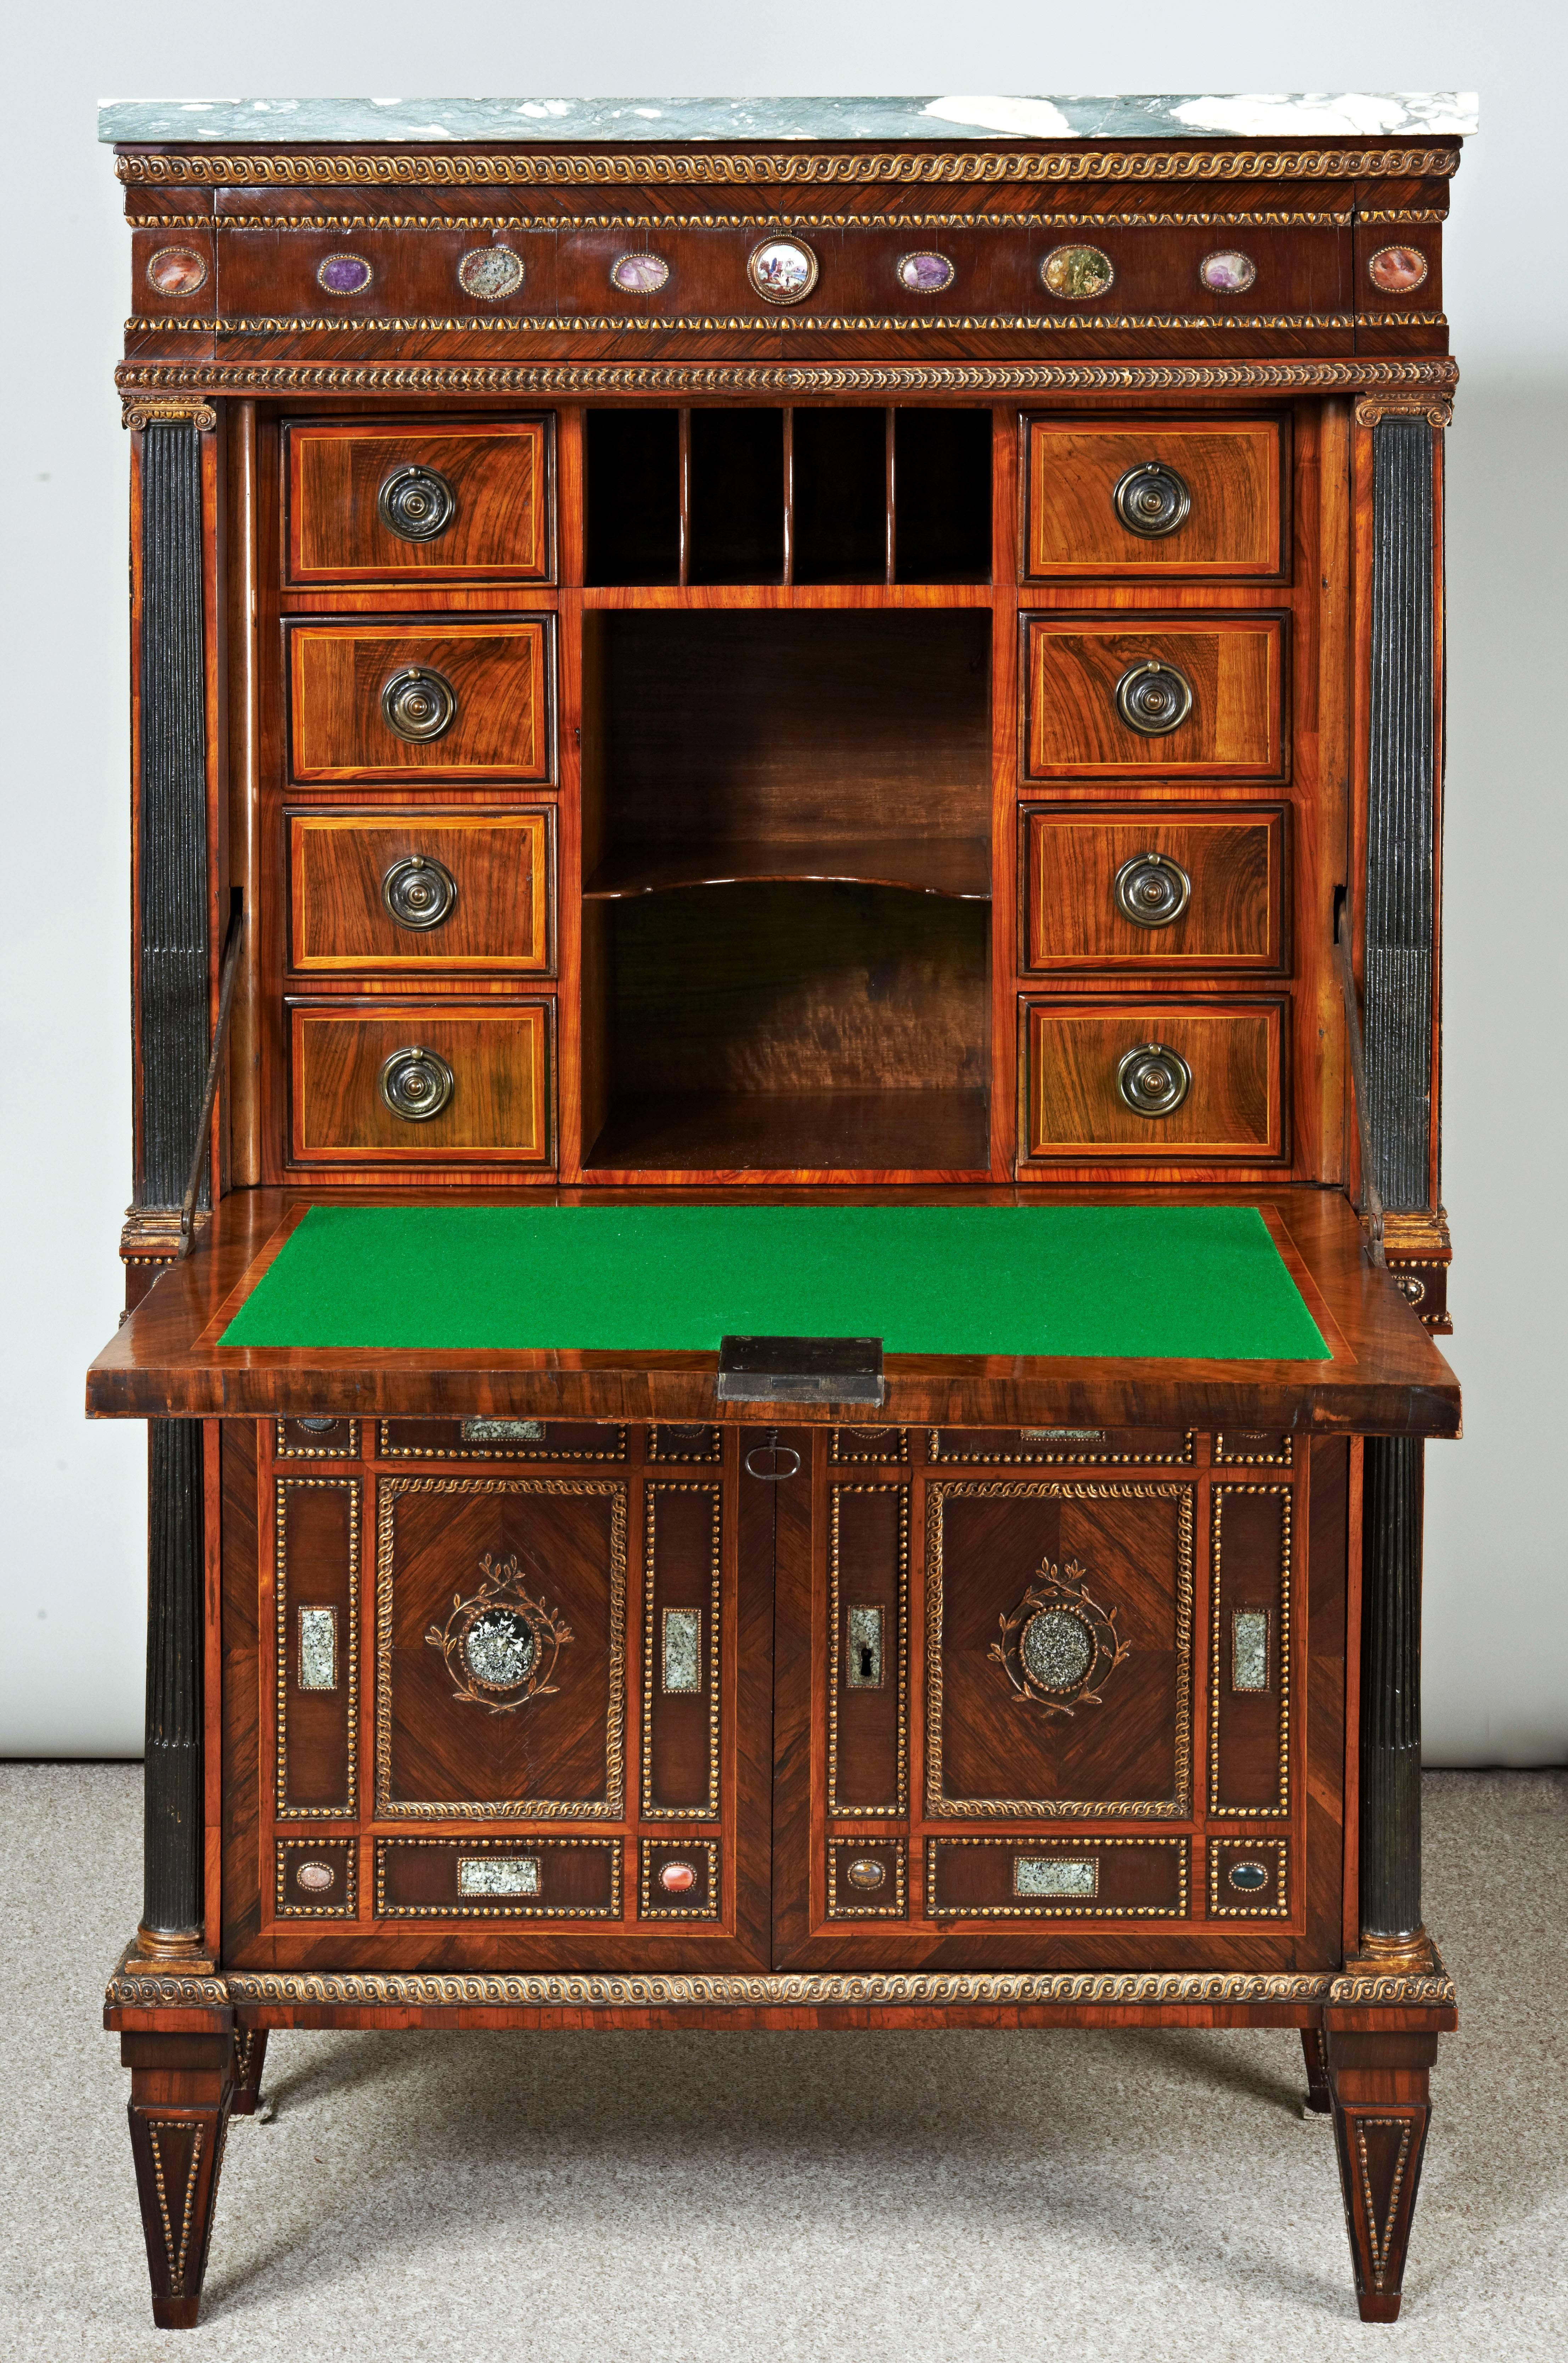 A very rare North Italian secretaire cabinet with a breccia verde marble top, a frieze drawer set with eight hardstone specimens, the fall front with a central oval green porphyry panel surrounded by hardstone and marble specimens on a purple heart